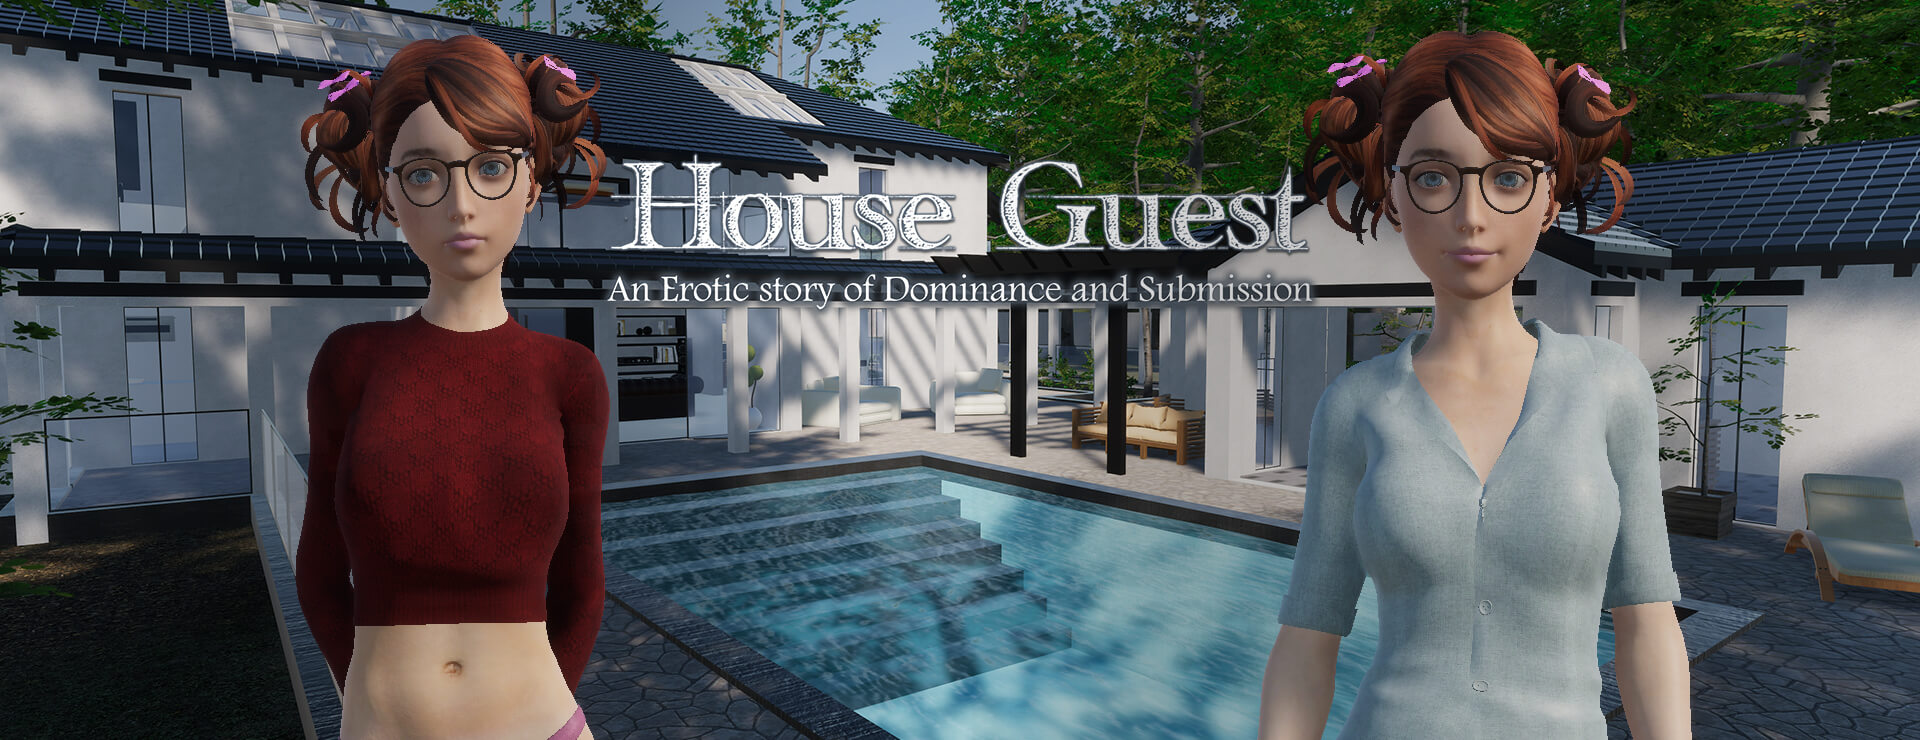 House Guest - Simulation Game